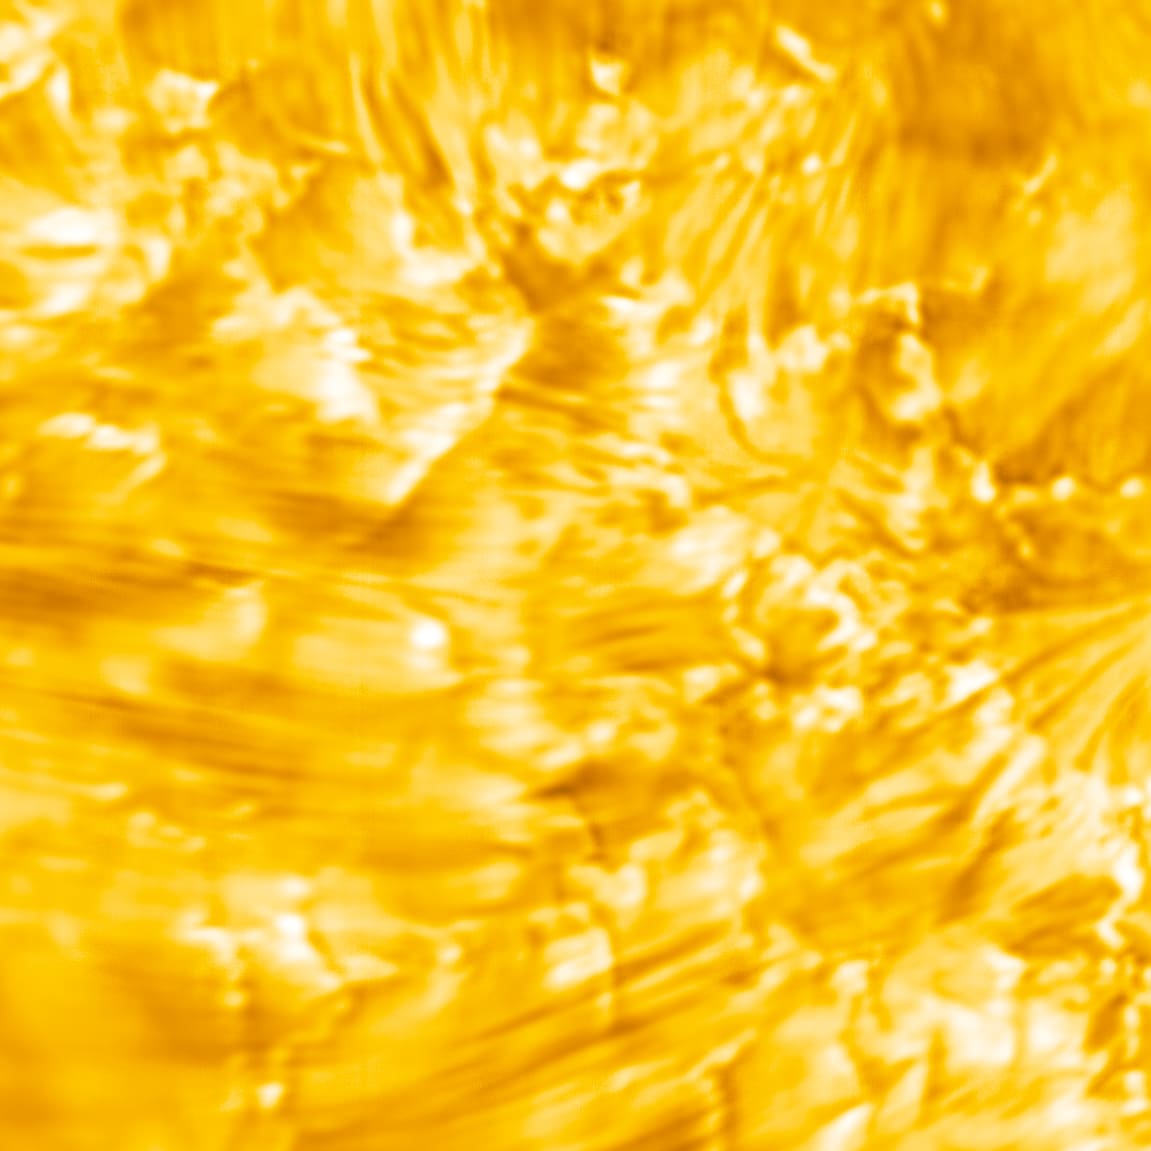 This image, taken by Inouye Solar Telescope in coordination with the ESA’s Solar Orbiter, reveals the fibrillar nature of the solar atmosphere. In the atmosphere, or chromosphere, fine, dark threads of plasma (fibril) are visible emanating from the magnetic network below. The outline of bright structures are signature of the presence of magnetic fields. Image Title: The Fibrillar Nature of the Solar Atmosphere PID: PID_1_123 Image Credit: NSF/AURA/NSO Image Processing: Friedrich Wöger(NSO), Catherine Fischer (NSO) Science Credit: Public DDT Data